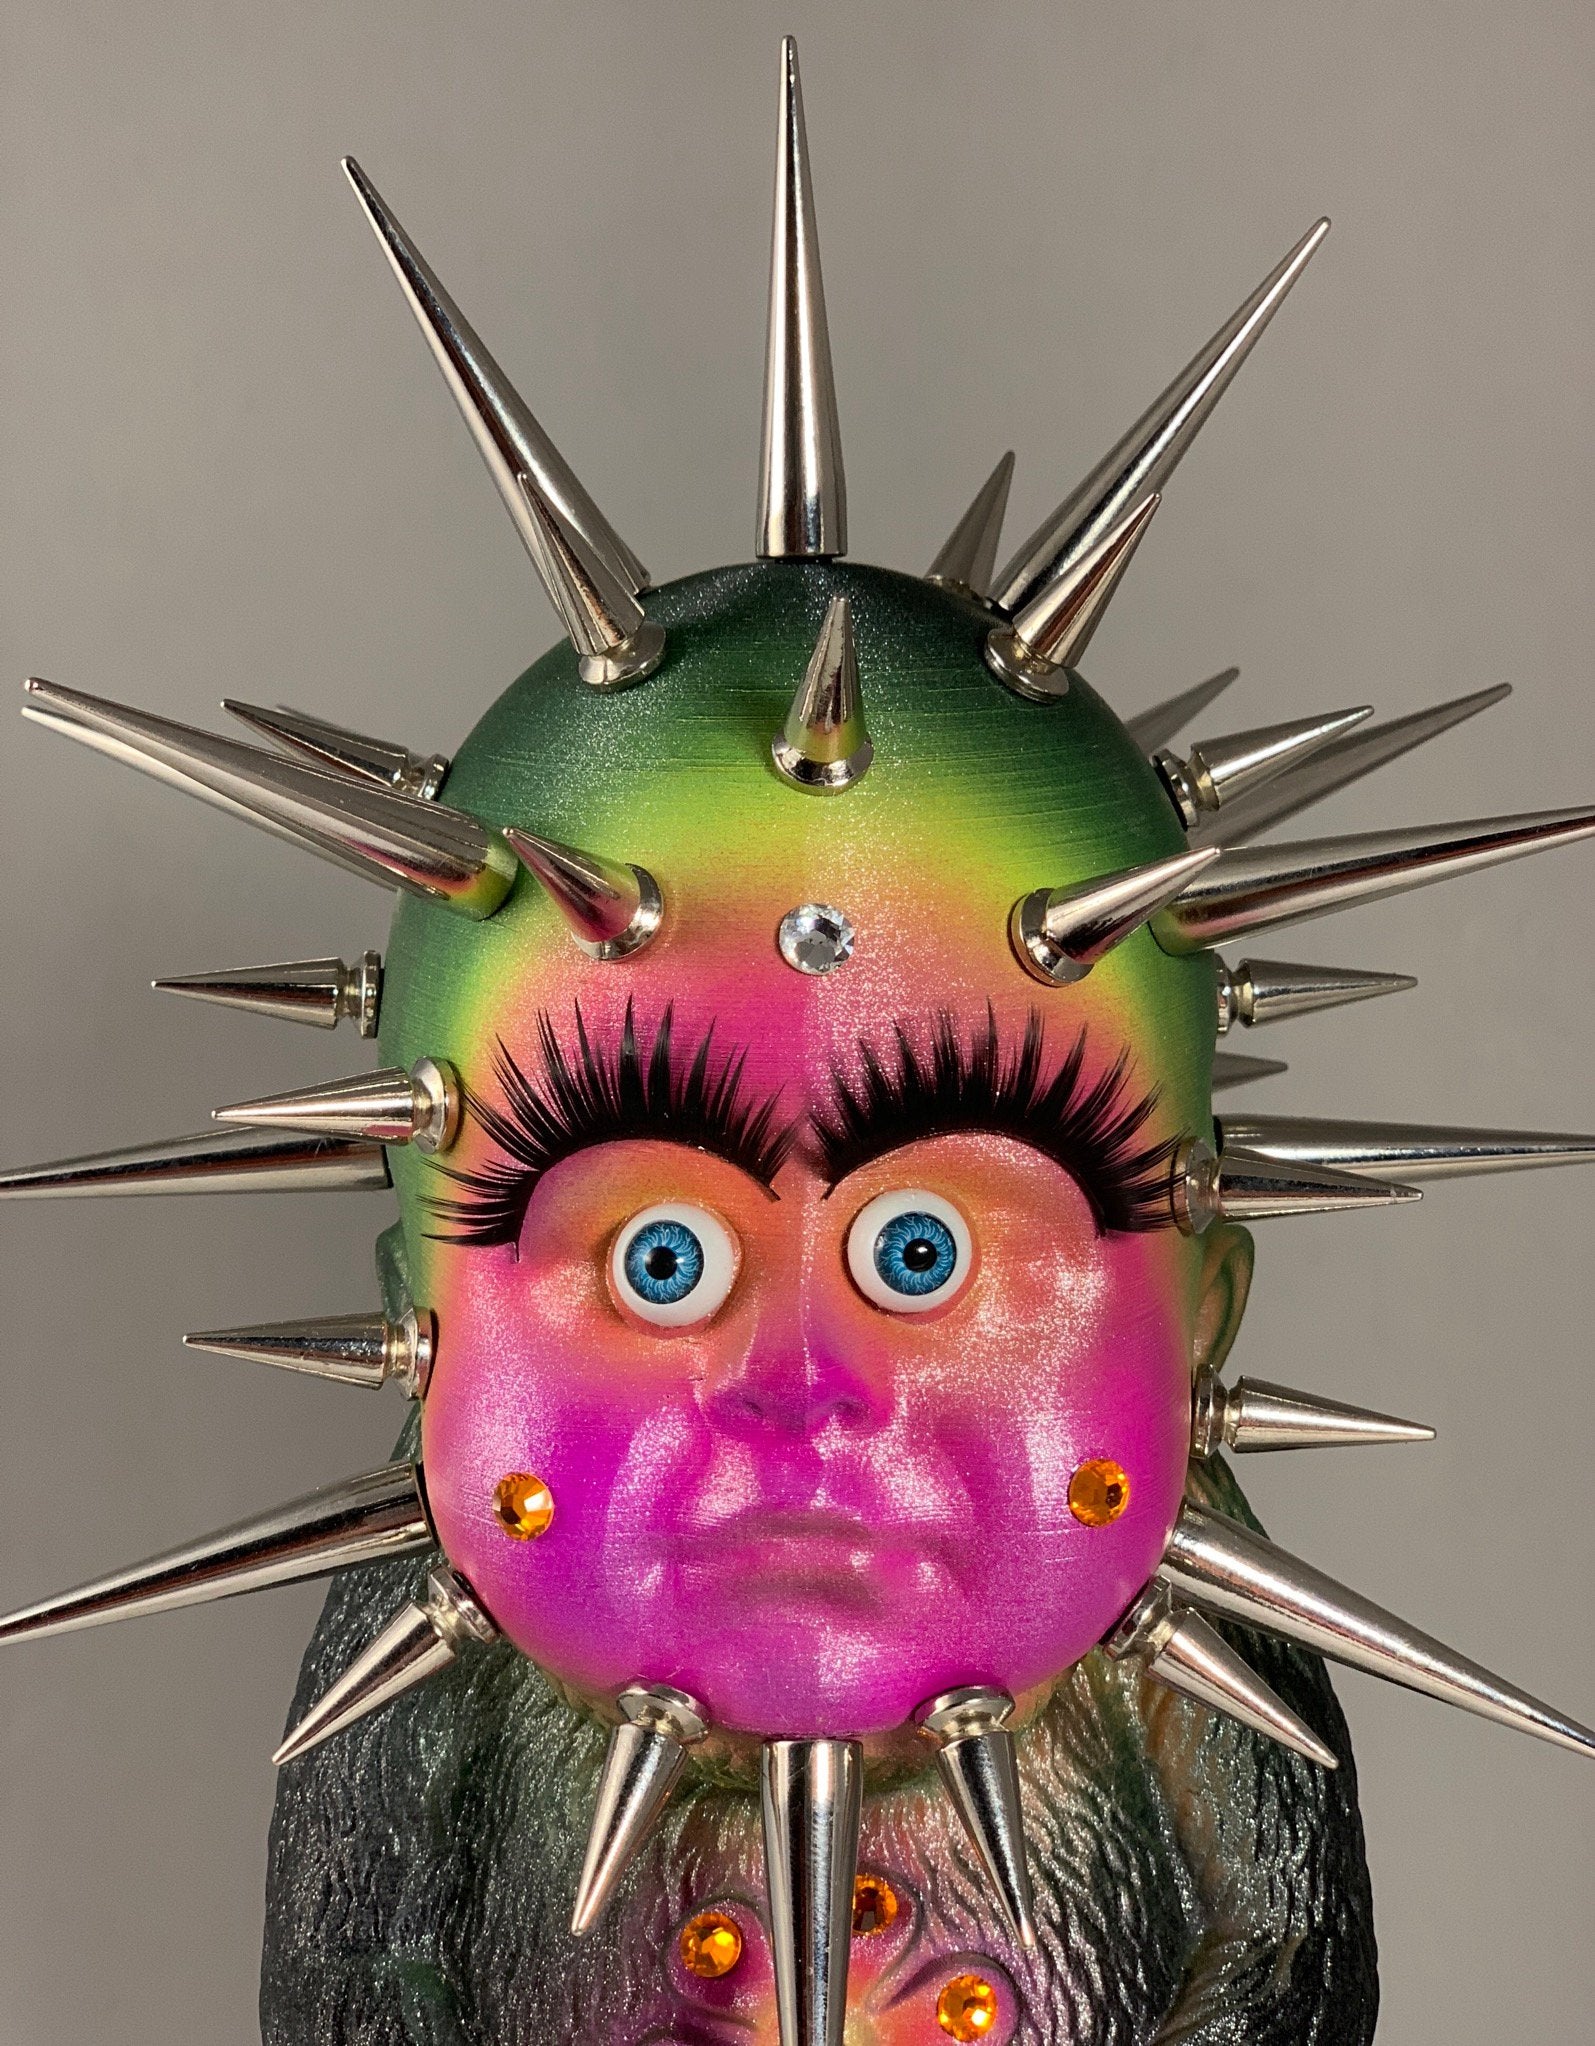 Giant Baby Headed Monster Freak with Crazy Spikes and Rhinestones 